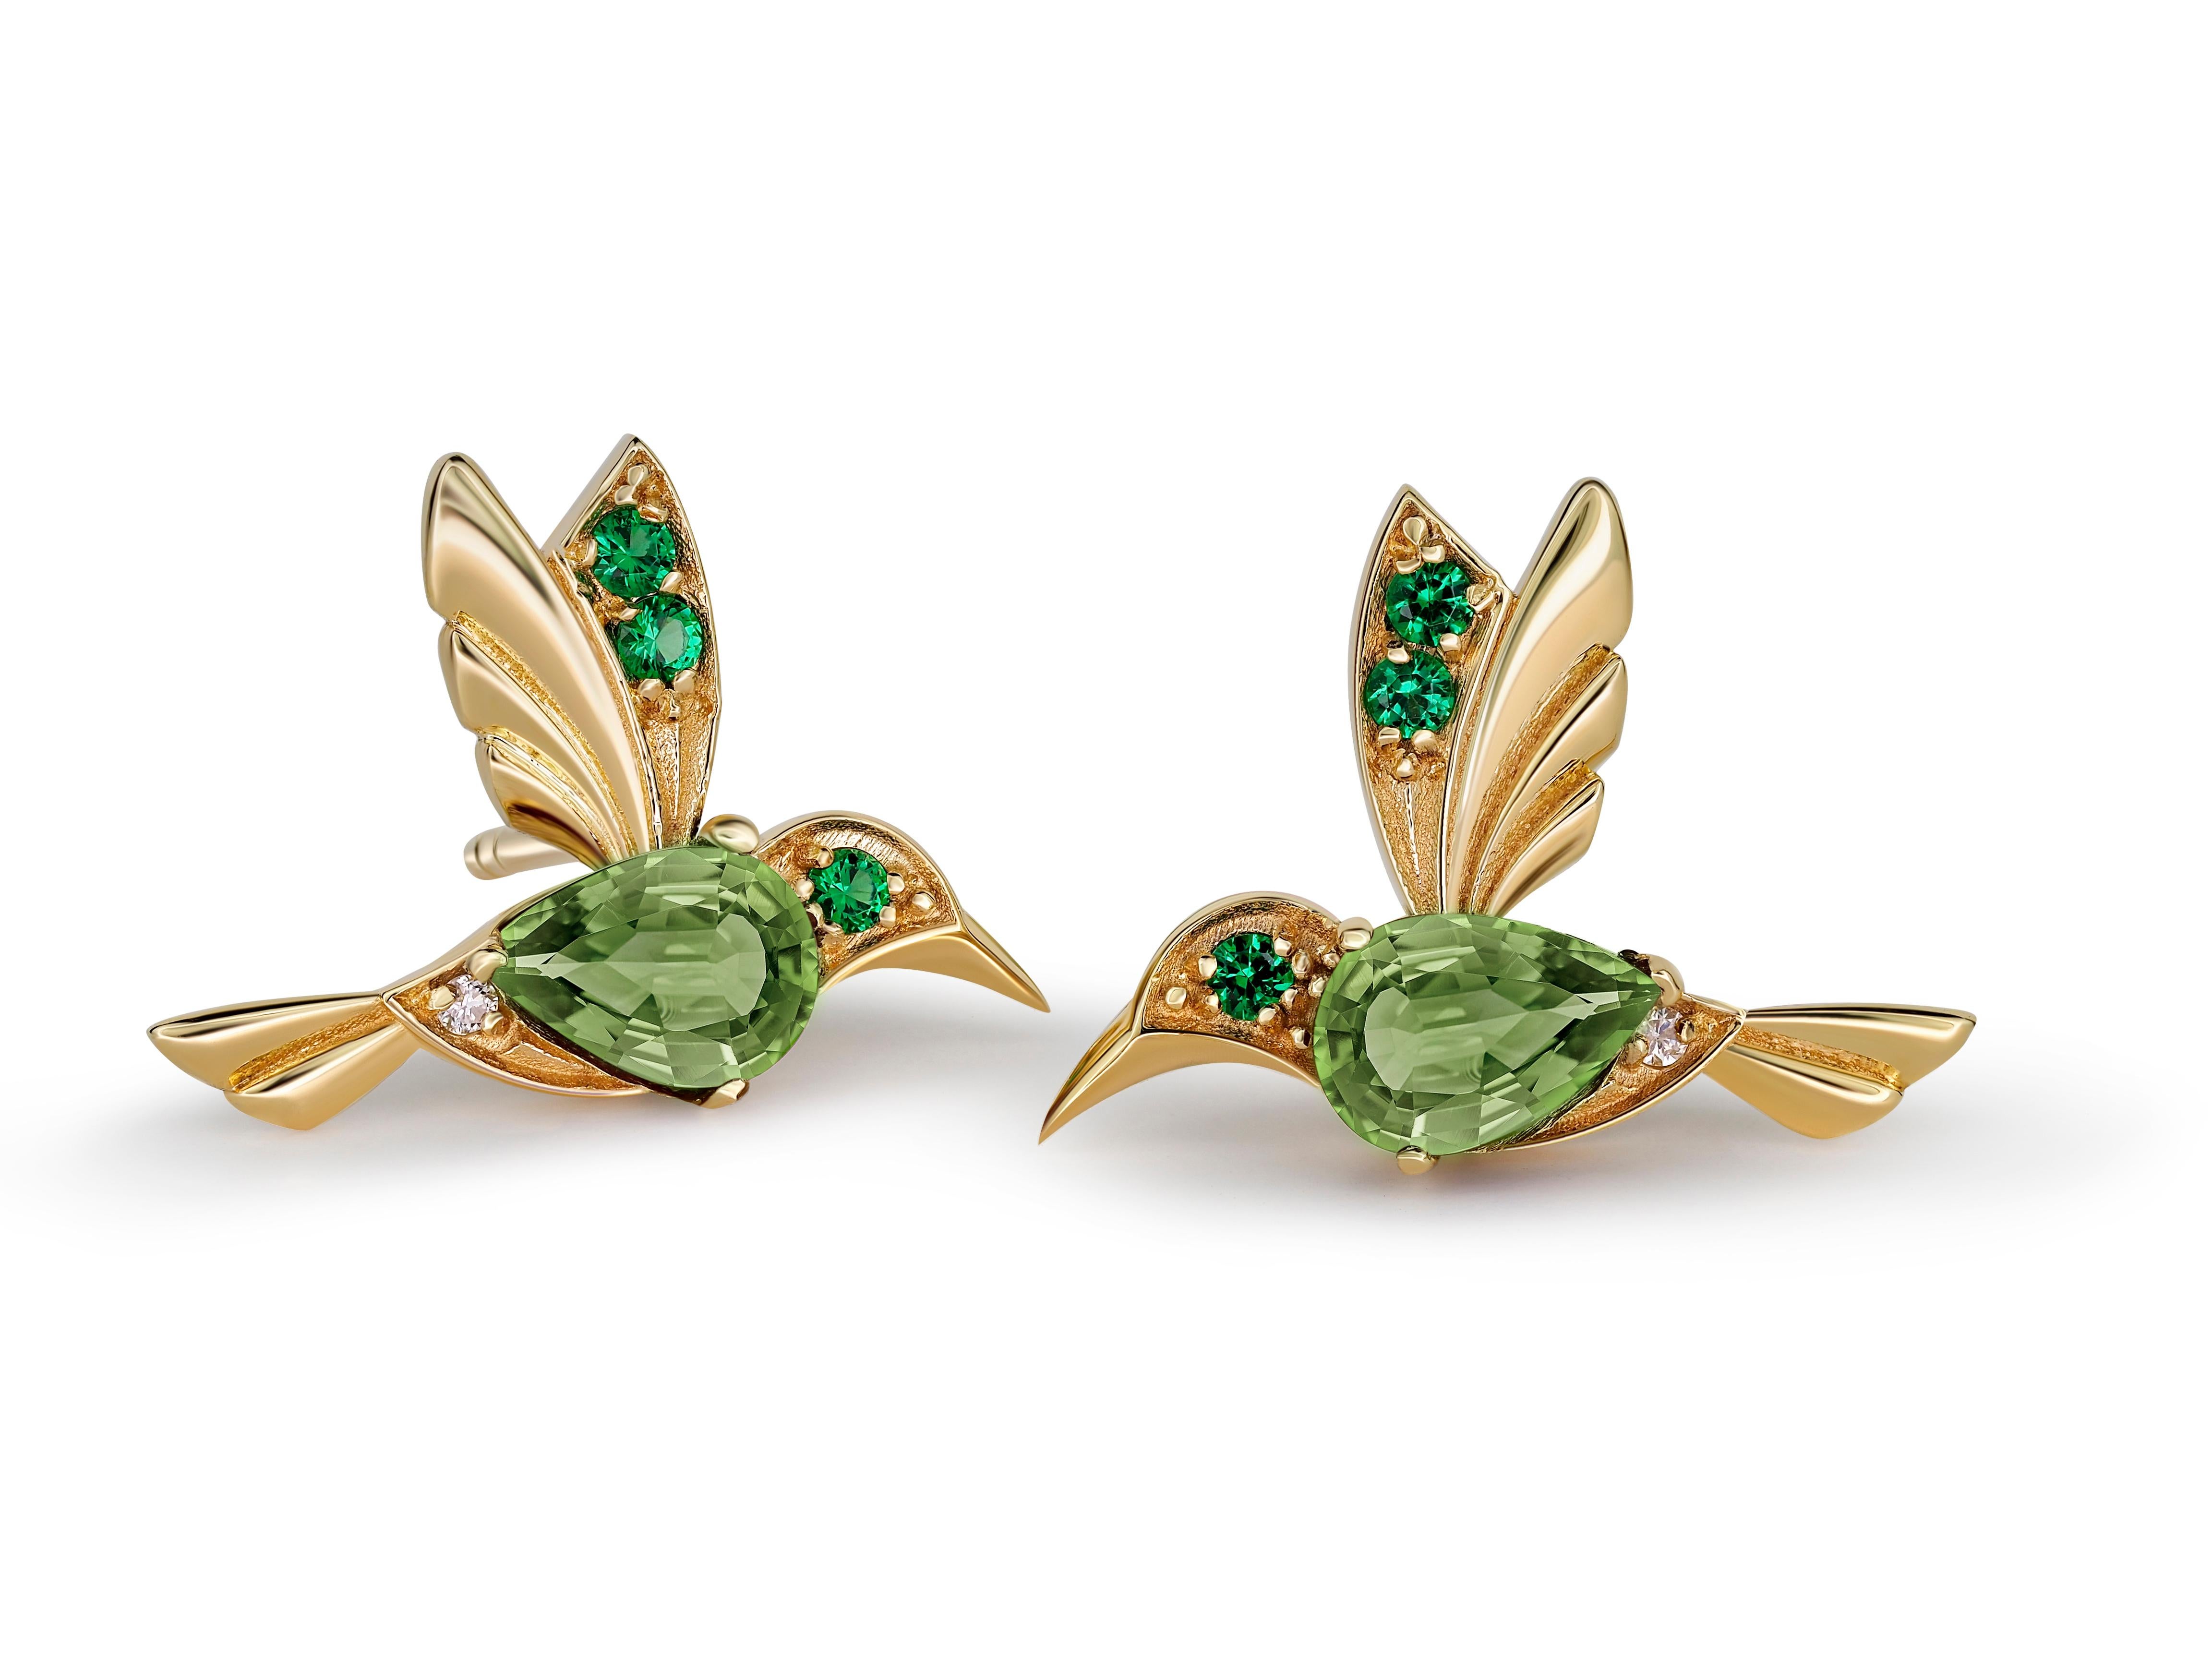 14k Gold Hummingbird earrings studs with peridots. 
Bird Stud Earrings with gems. Peridot august earrings. Delicate Animal Earrings.

Metal: 14 karat gold.
Weight: 1.95 g.
Size: 11.73 x 15.85 mm.

Central stones: Genuine peridots
Cut:  pear
Weight: